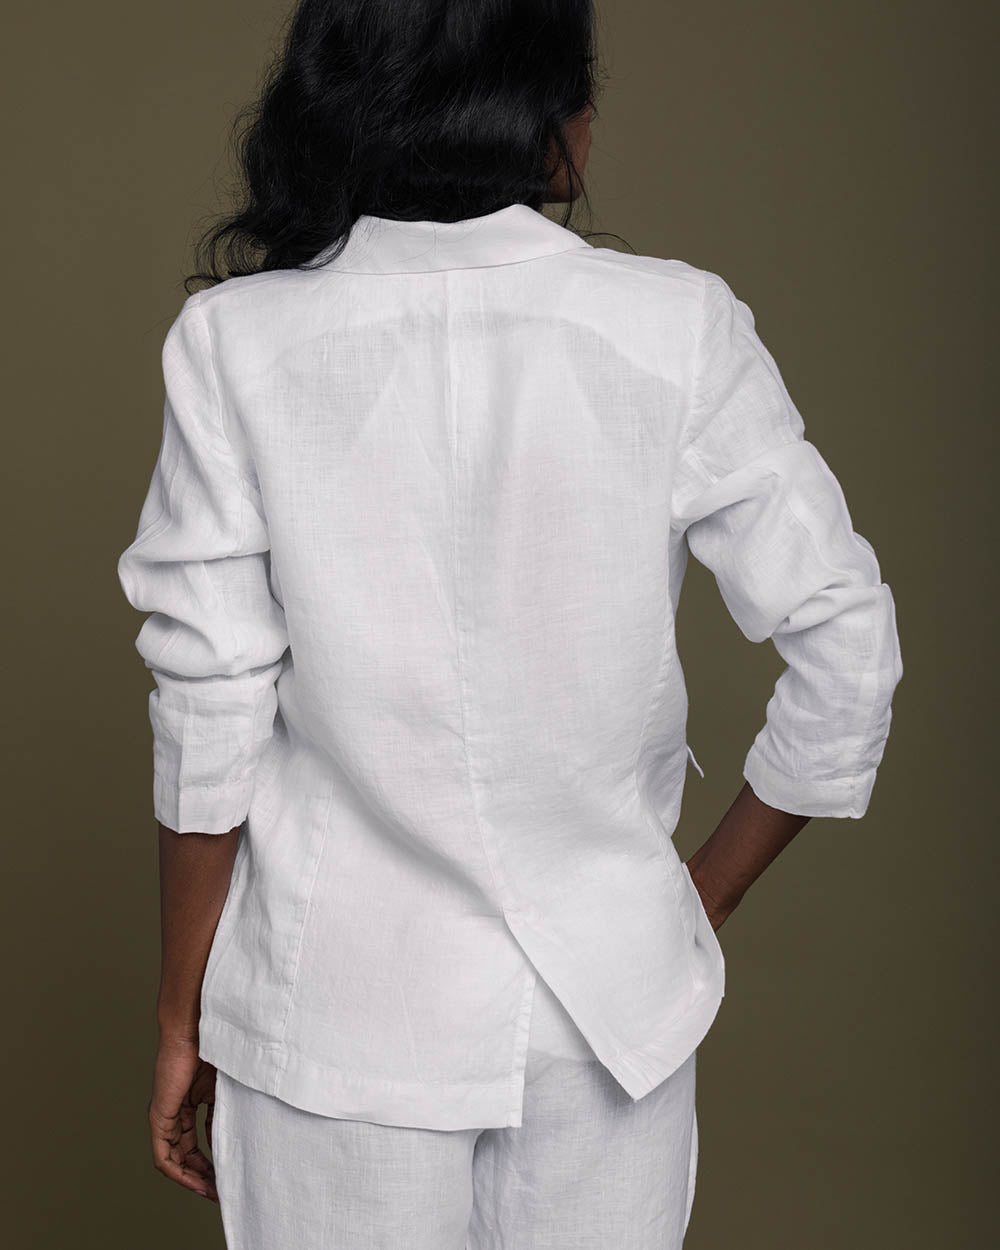 The She’S Everything Blazer - Coconut White at Kamakhyaa by Reistor. This item is Blazers, Casual Wear, Hemp, Natural, Office Wear, Solids, White, Womenswear